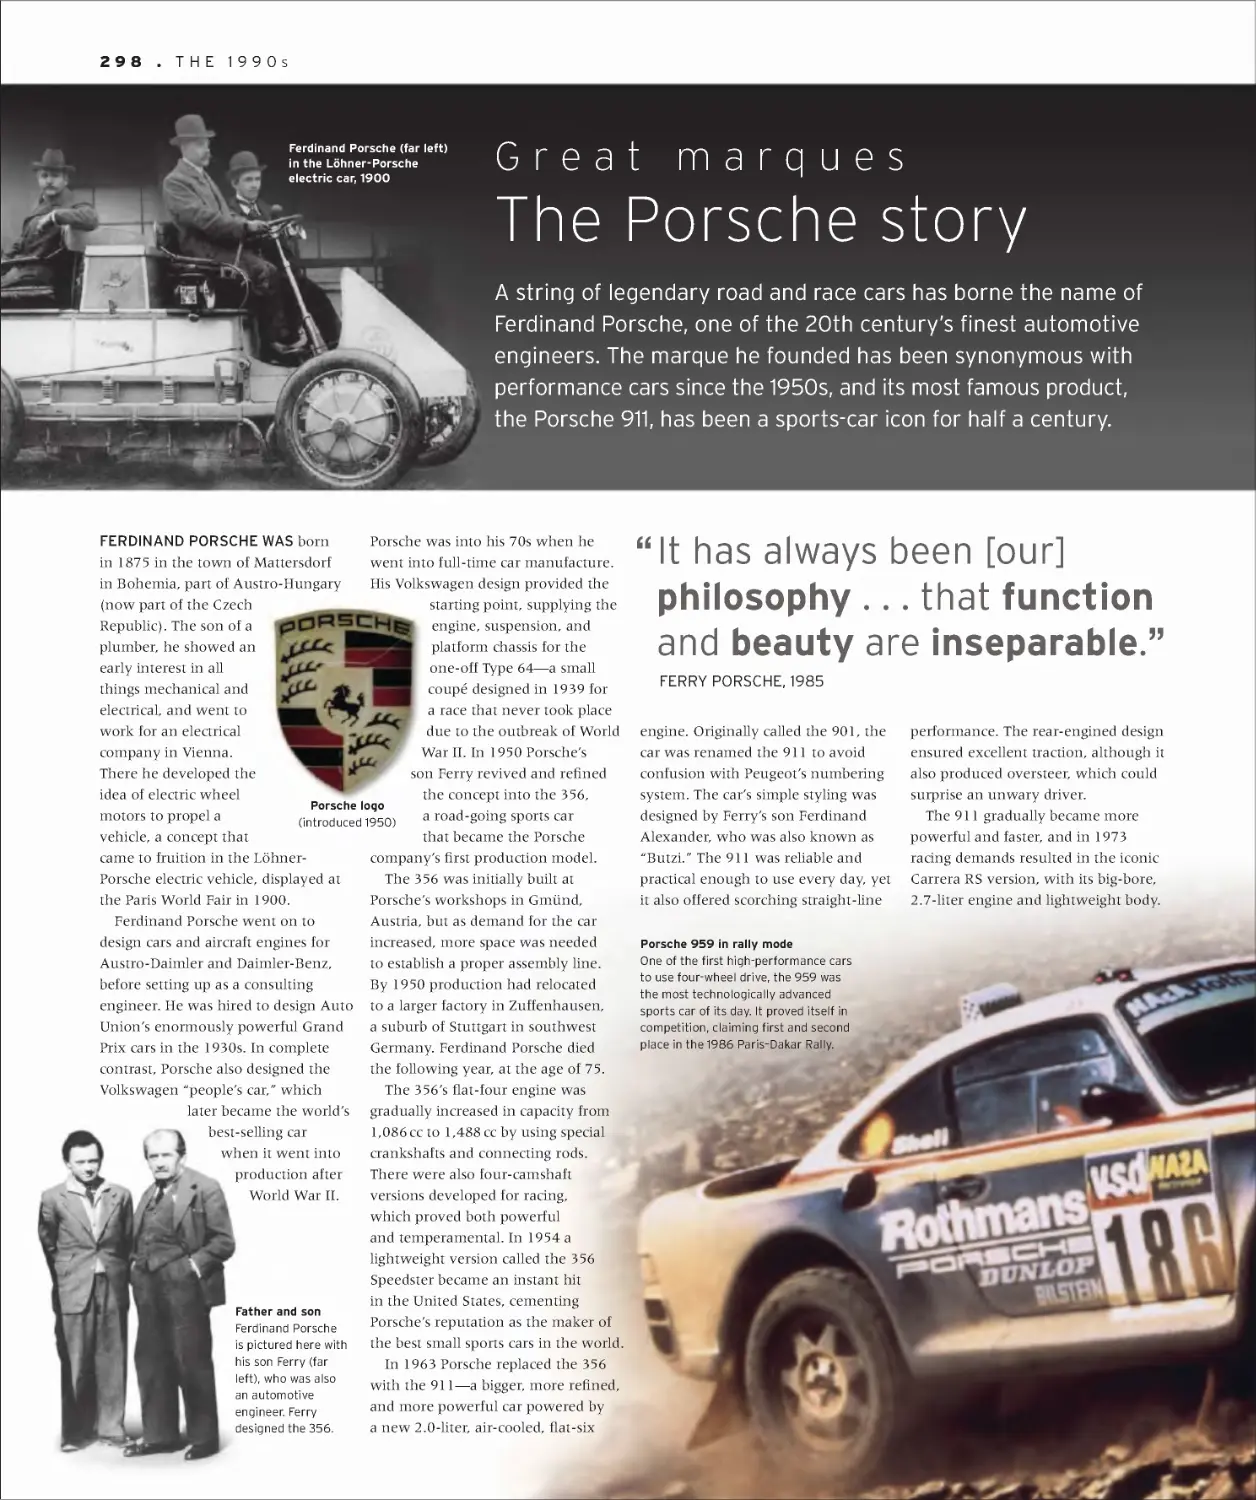 Great marques: The Porsche story 298